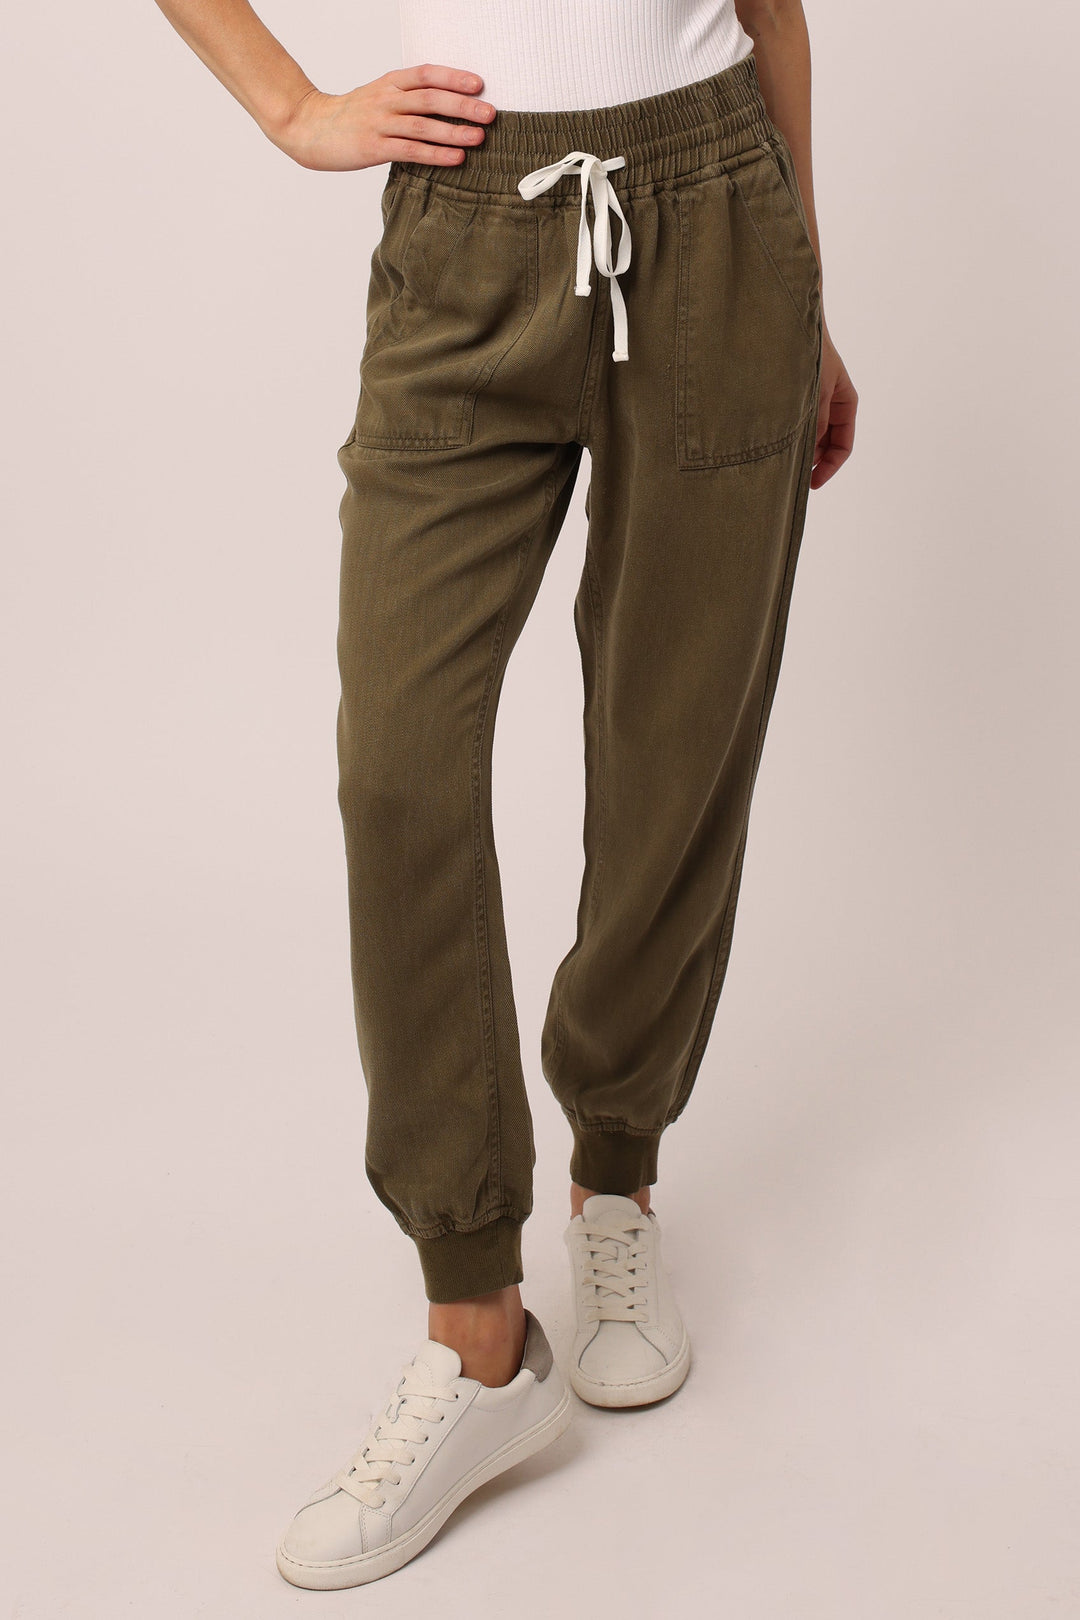 image of a female model wearing a JACEY SUPER HIGH RISE CROPPED JOGGER PANTS CYPRESS PANTS